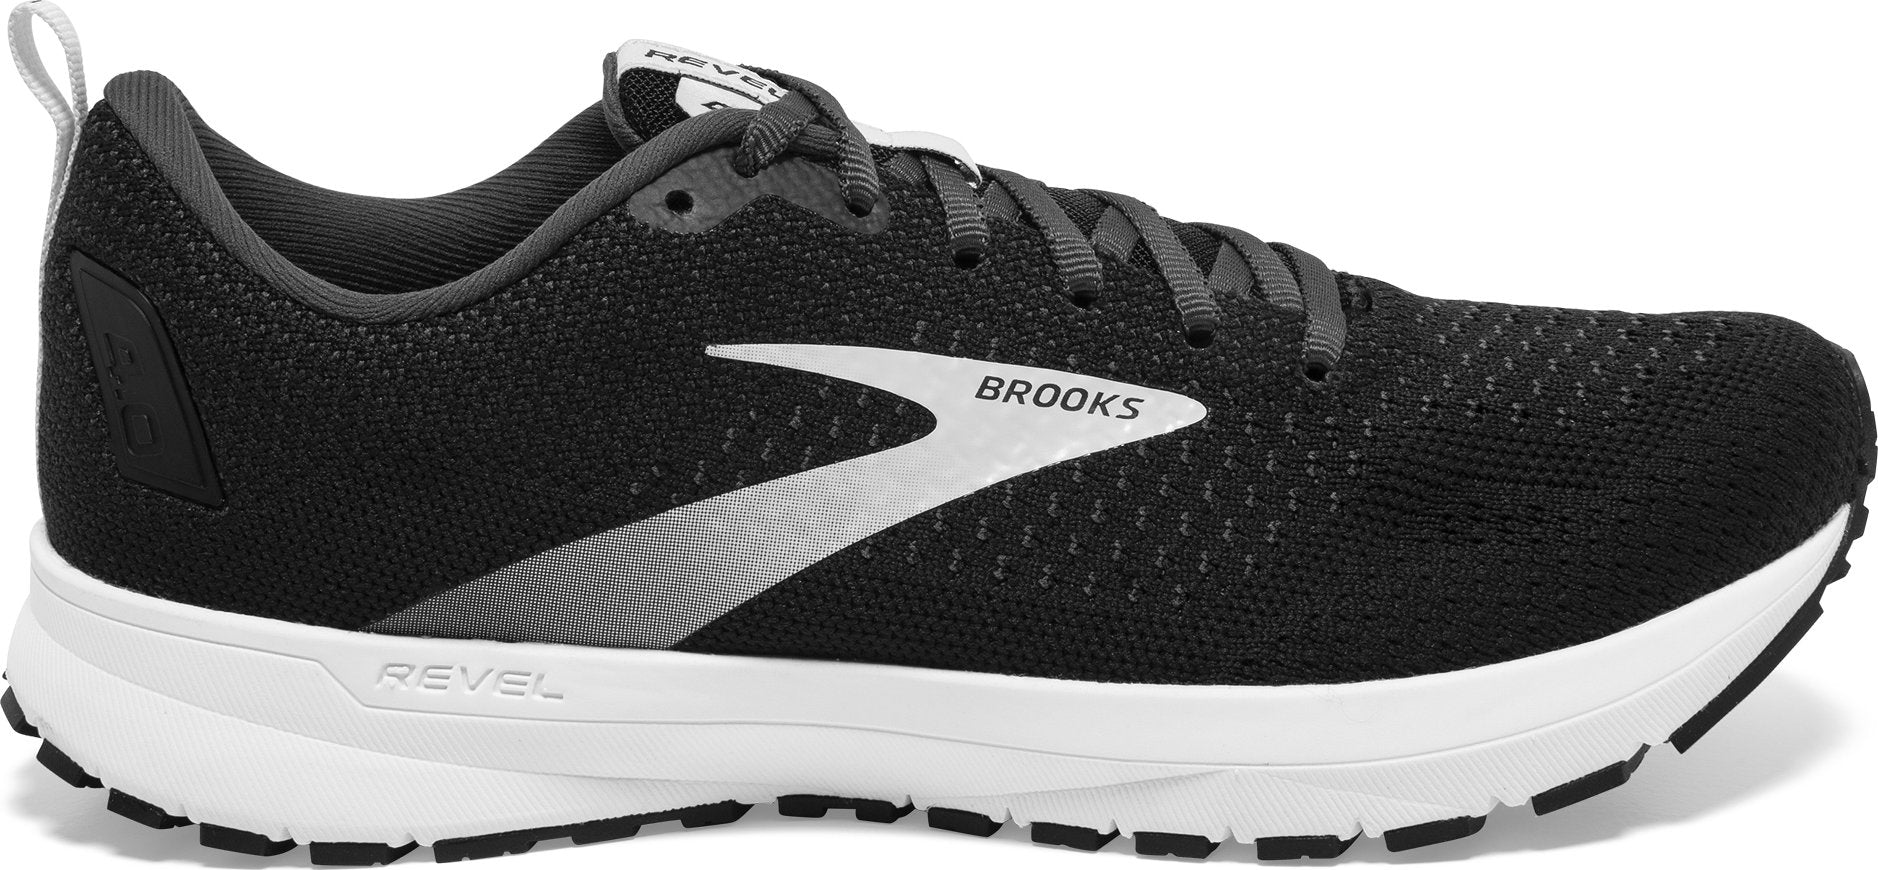 brooks volleyball shoes